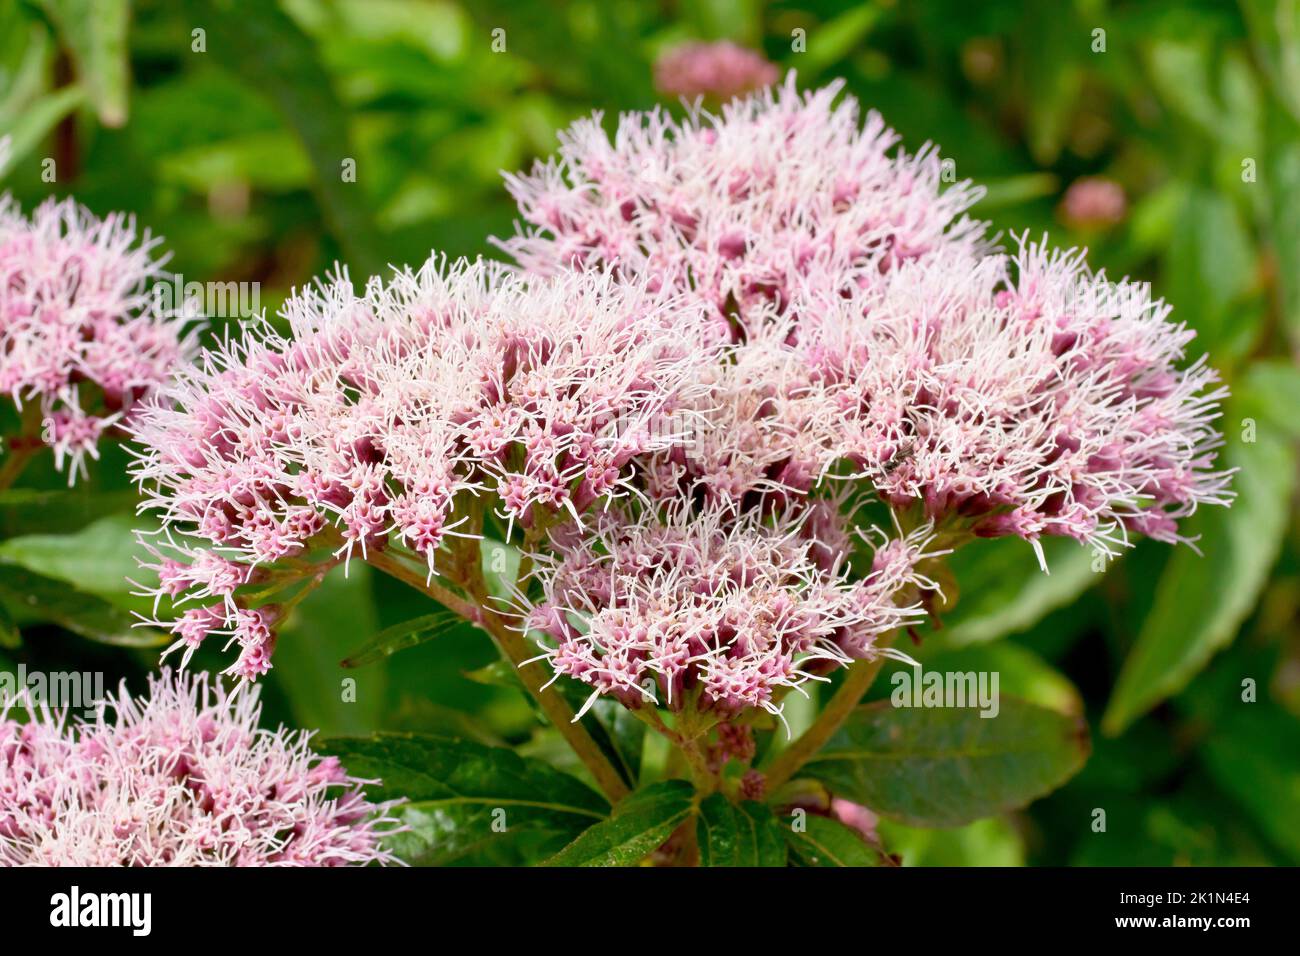 Hemp Agrimony (eupatorium cannabinum), close up of the large pink flowerheads produced by the plant in summer. Stock Photo